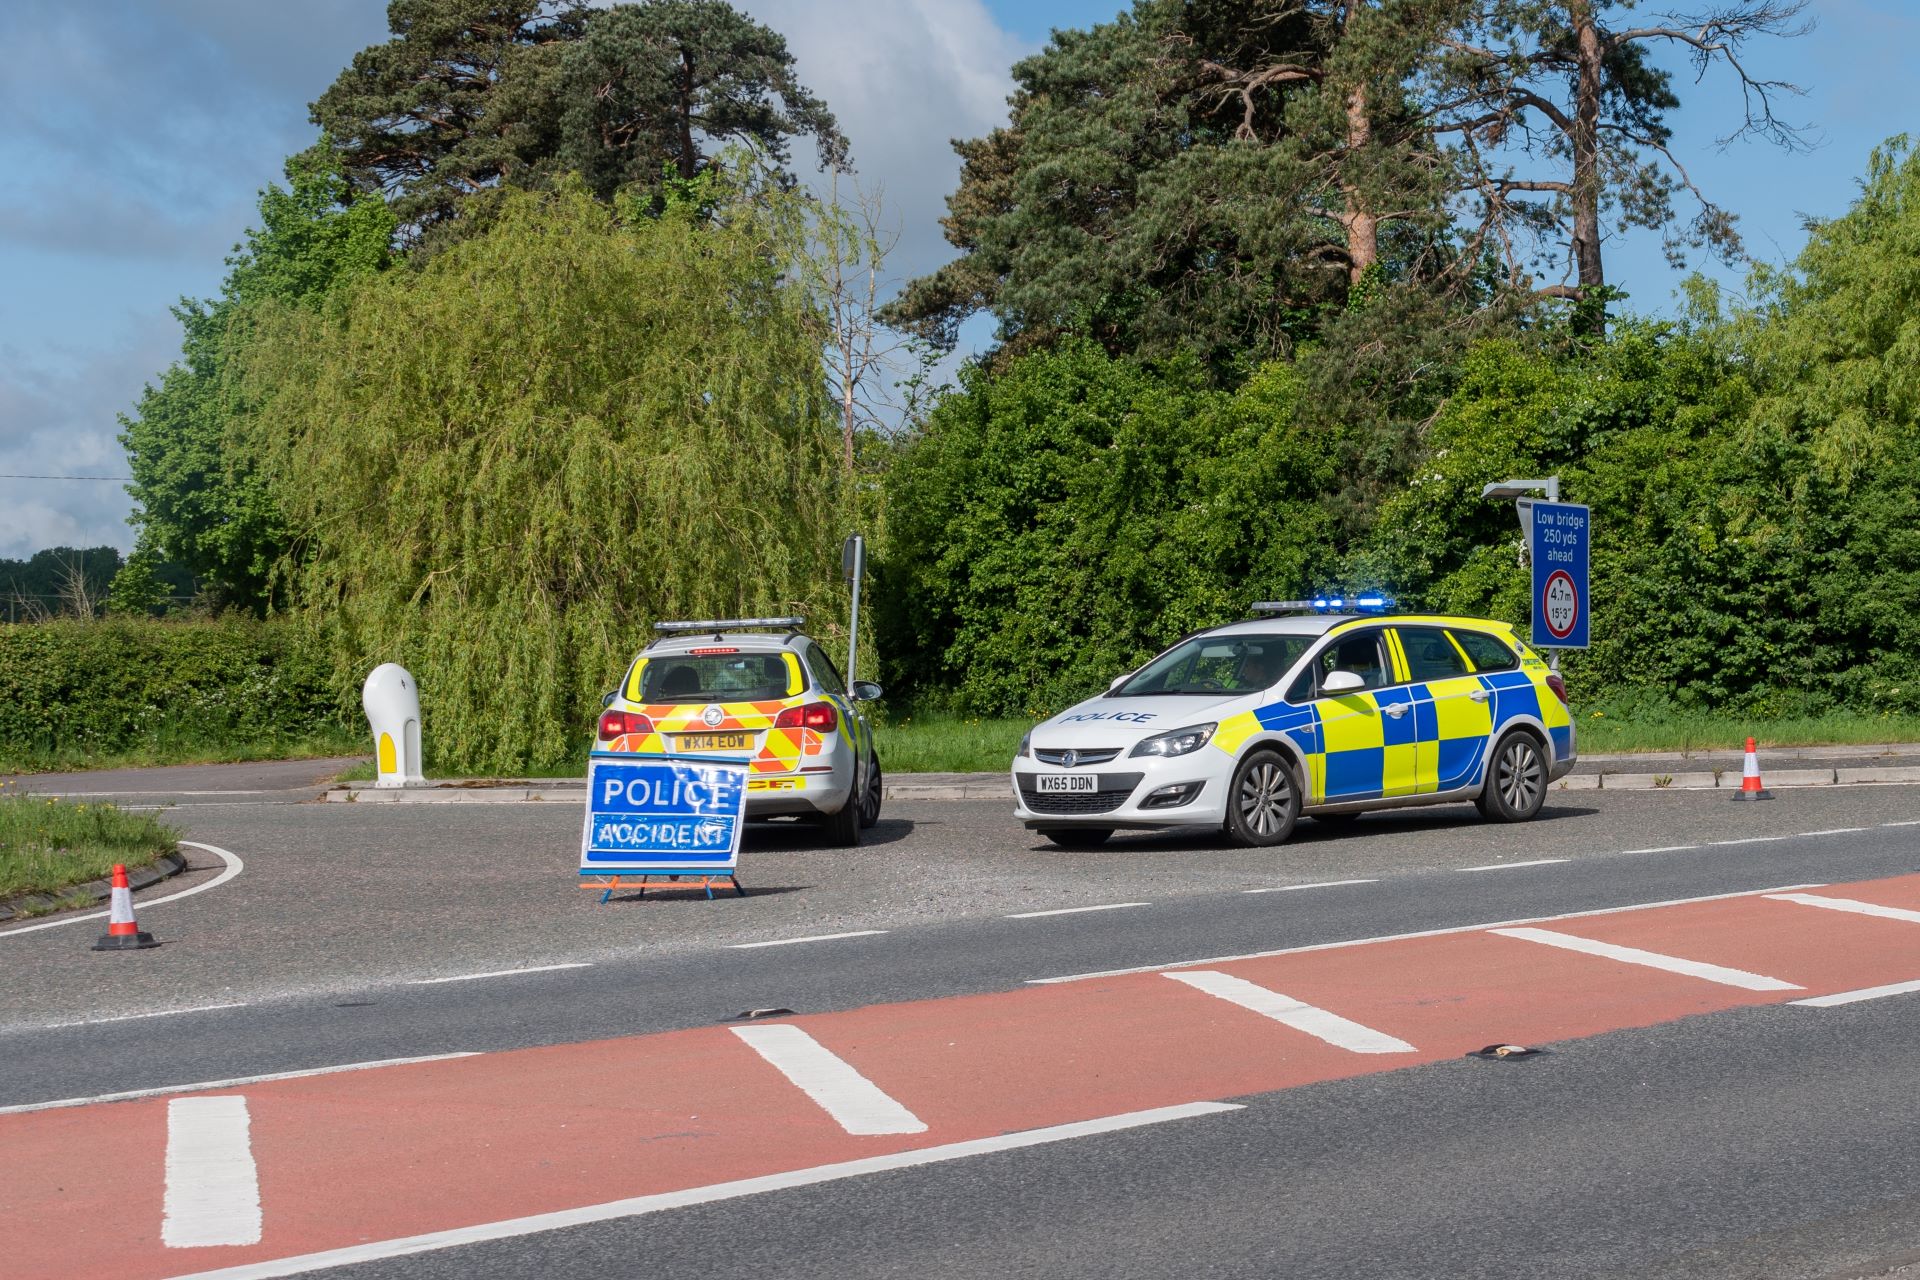 Two police cars that have closed off a road due to a collision.